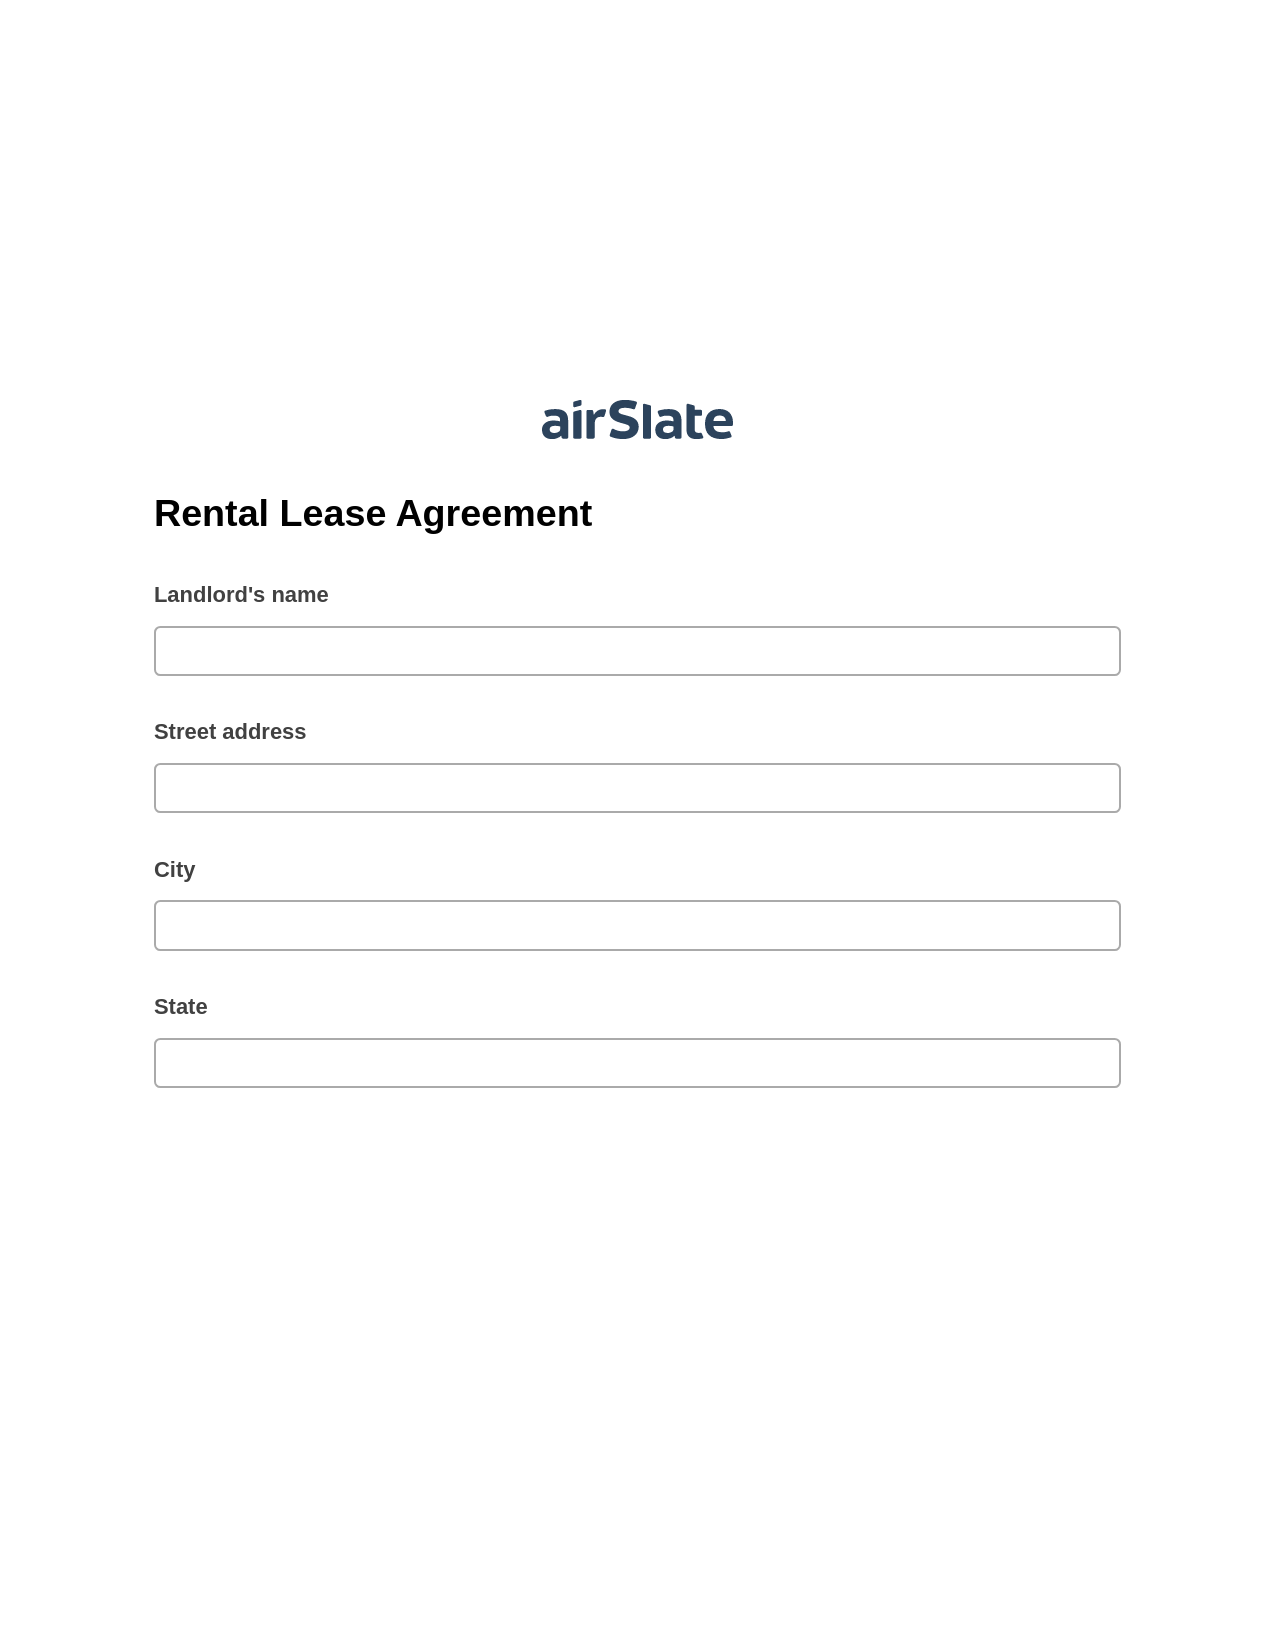 Rental Lease Agreement Pre-fill from CSV File Bot, Create QuickBooks invoice Bot, Export to Formstack Documents Bot